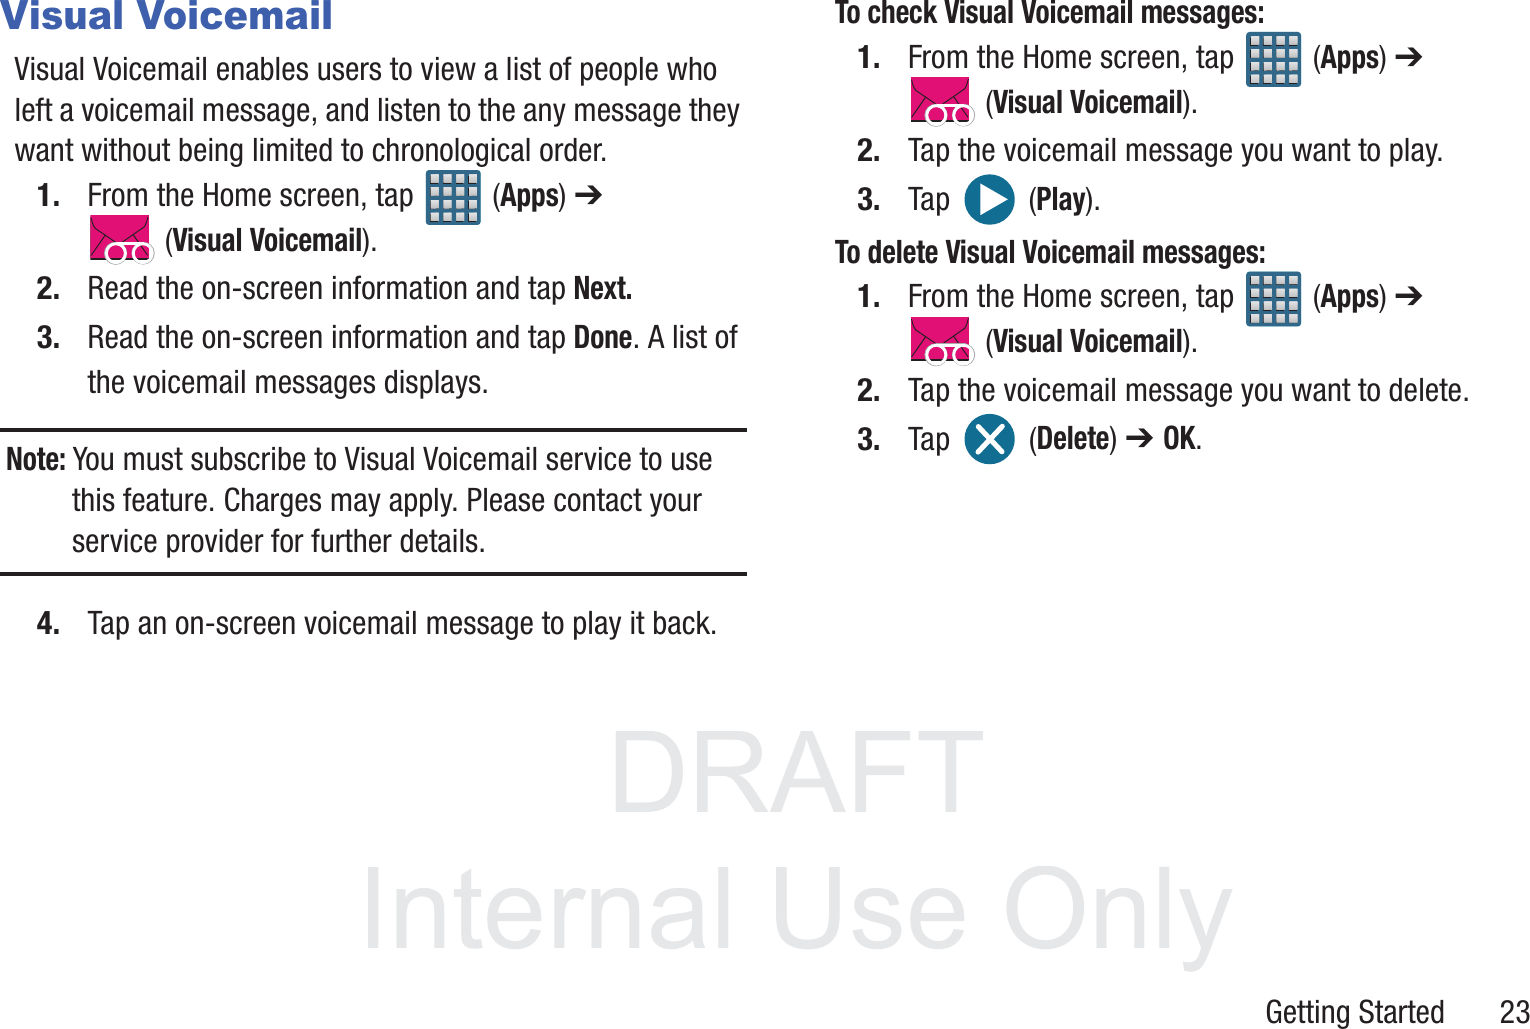 DRAFT InternalUse OnlyGetting Started       23Visual VoicemailVisual Voicemail enables users to view a list of people who left a voicemail message, and listen to the any message they want without being limited to chronological order.1. From the Home screen, tap   (Apps) ➔  (Visual Voicemail).2. Read the on-screen information and tap Next. 3. Read the on-screen information and tap Done. A list of the voicemail messages displays.Note: You must subscribe to Visual Voicemail service to use this feature. Charges may apply. Please contact your service provider for further details.4. Tap an on-screen voicemail message to play it back.To check Visual Voicemail messages:1. From the Home screen, tap   (Apps) ➔  (Visual Voicemail).2. Tap the voicemail message you want to play.3. Tap   (Play).To delete Visual Voicemail messages:1. From the Home screen, tap   (Apps) ➔  (Visual Voicemail).2. Tap the voicemail message you want to delete.3. Tap  (Delete) ➔ OK.